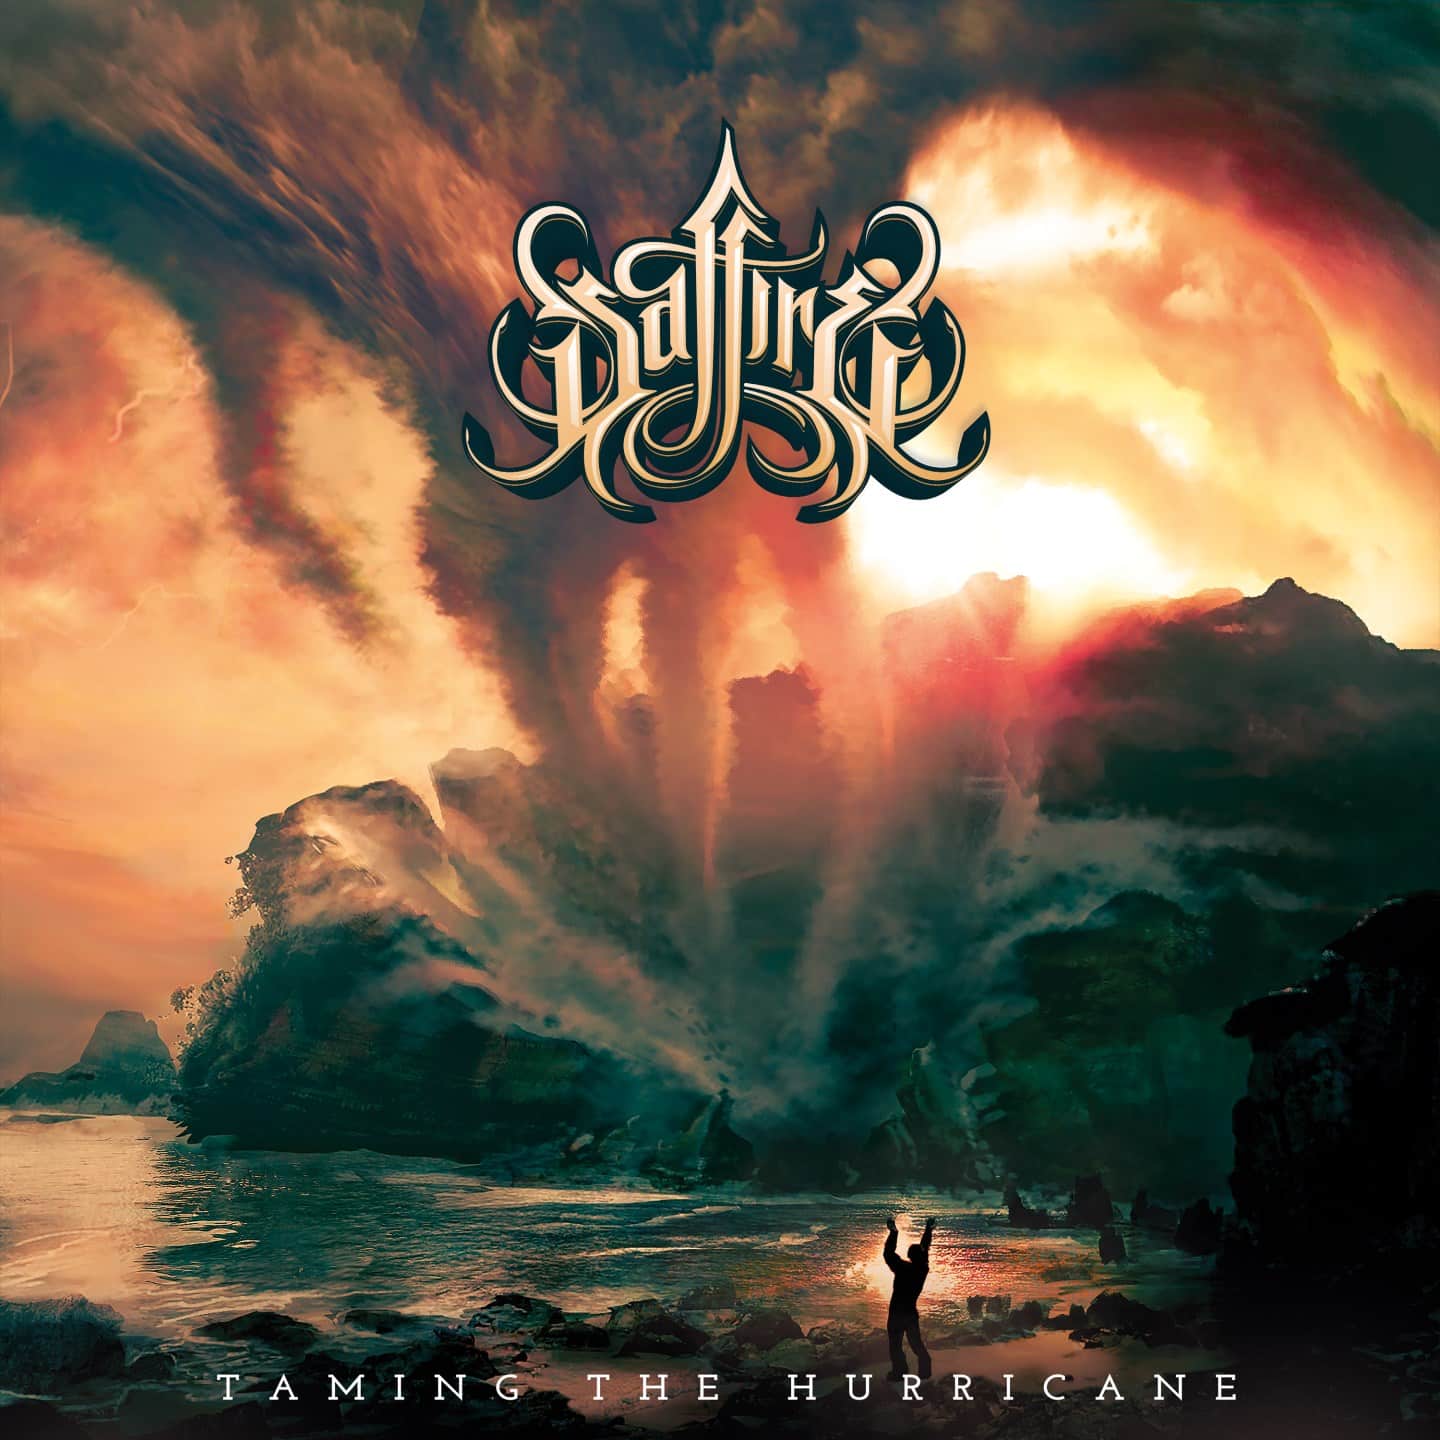 NY VIDEO: Saffire - Fortune Favors The Bold 1